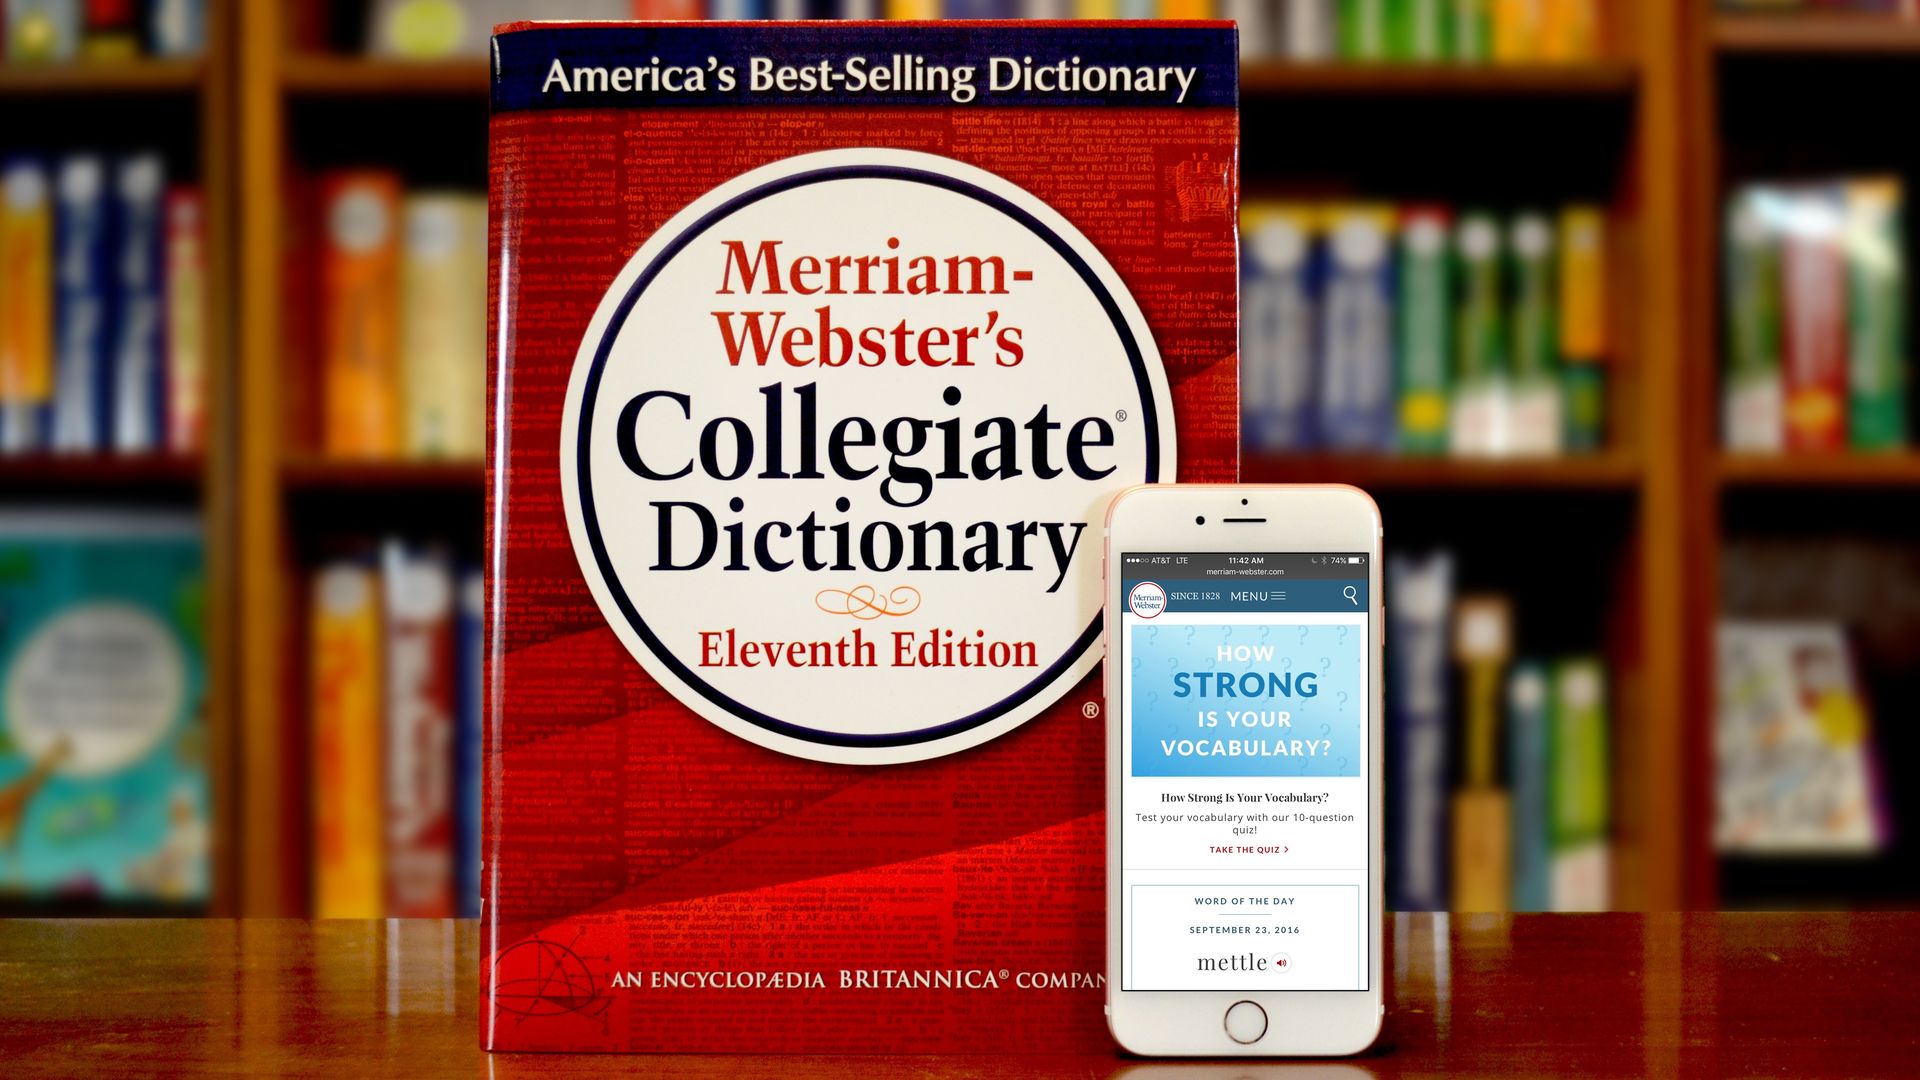 The Merriam-Webster dictionary